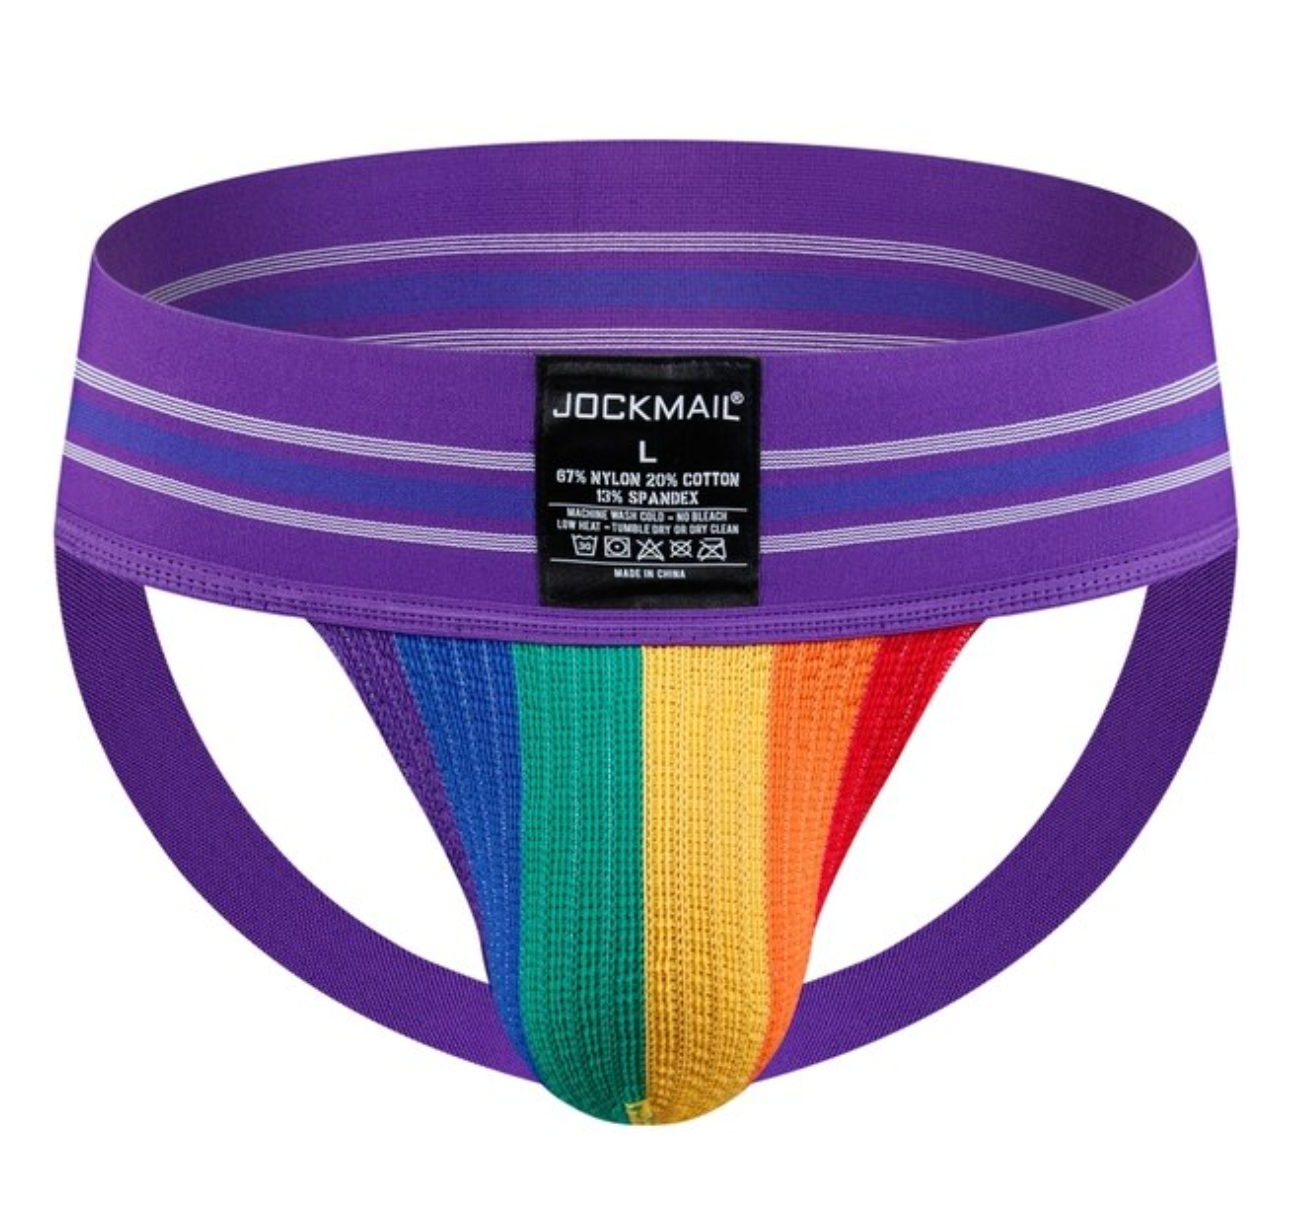 Rainbow Jockstrap - 35.00 with free shipping on Gays+ Store 